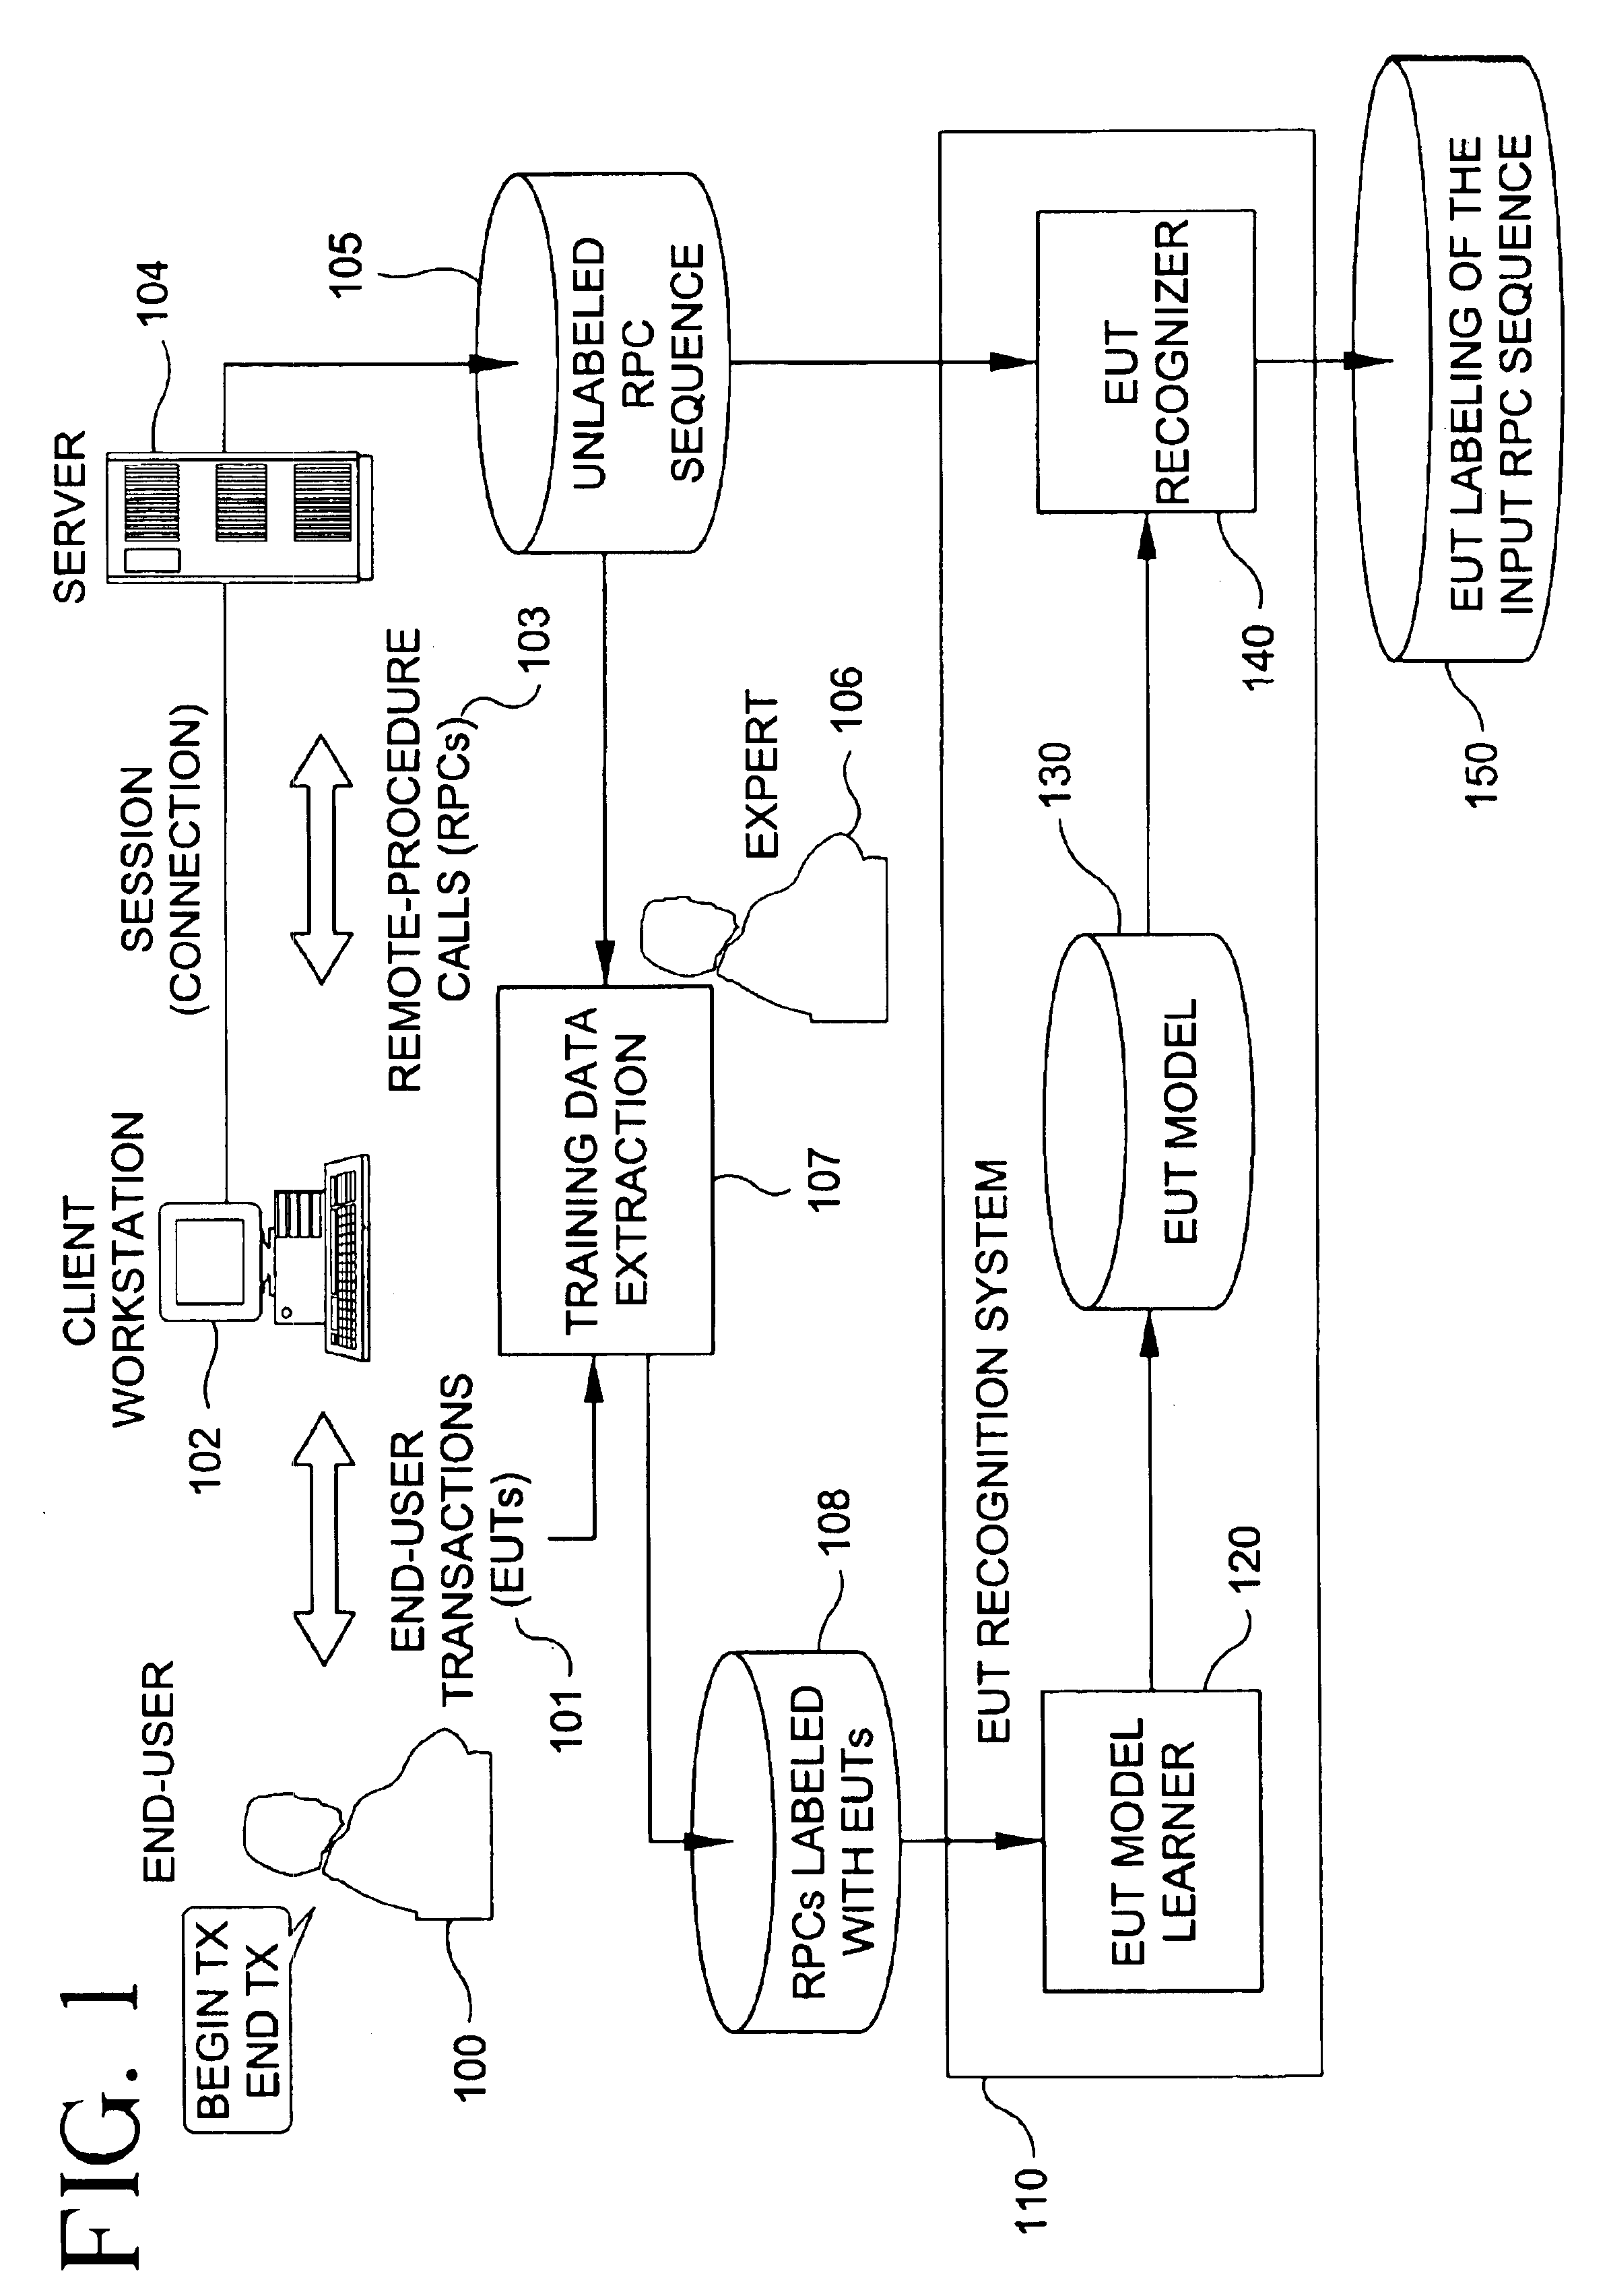 Method and system for recognizing end-user transactions